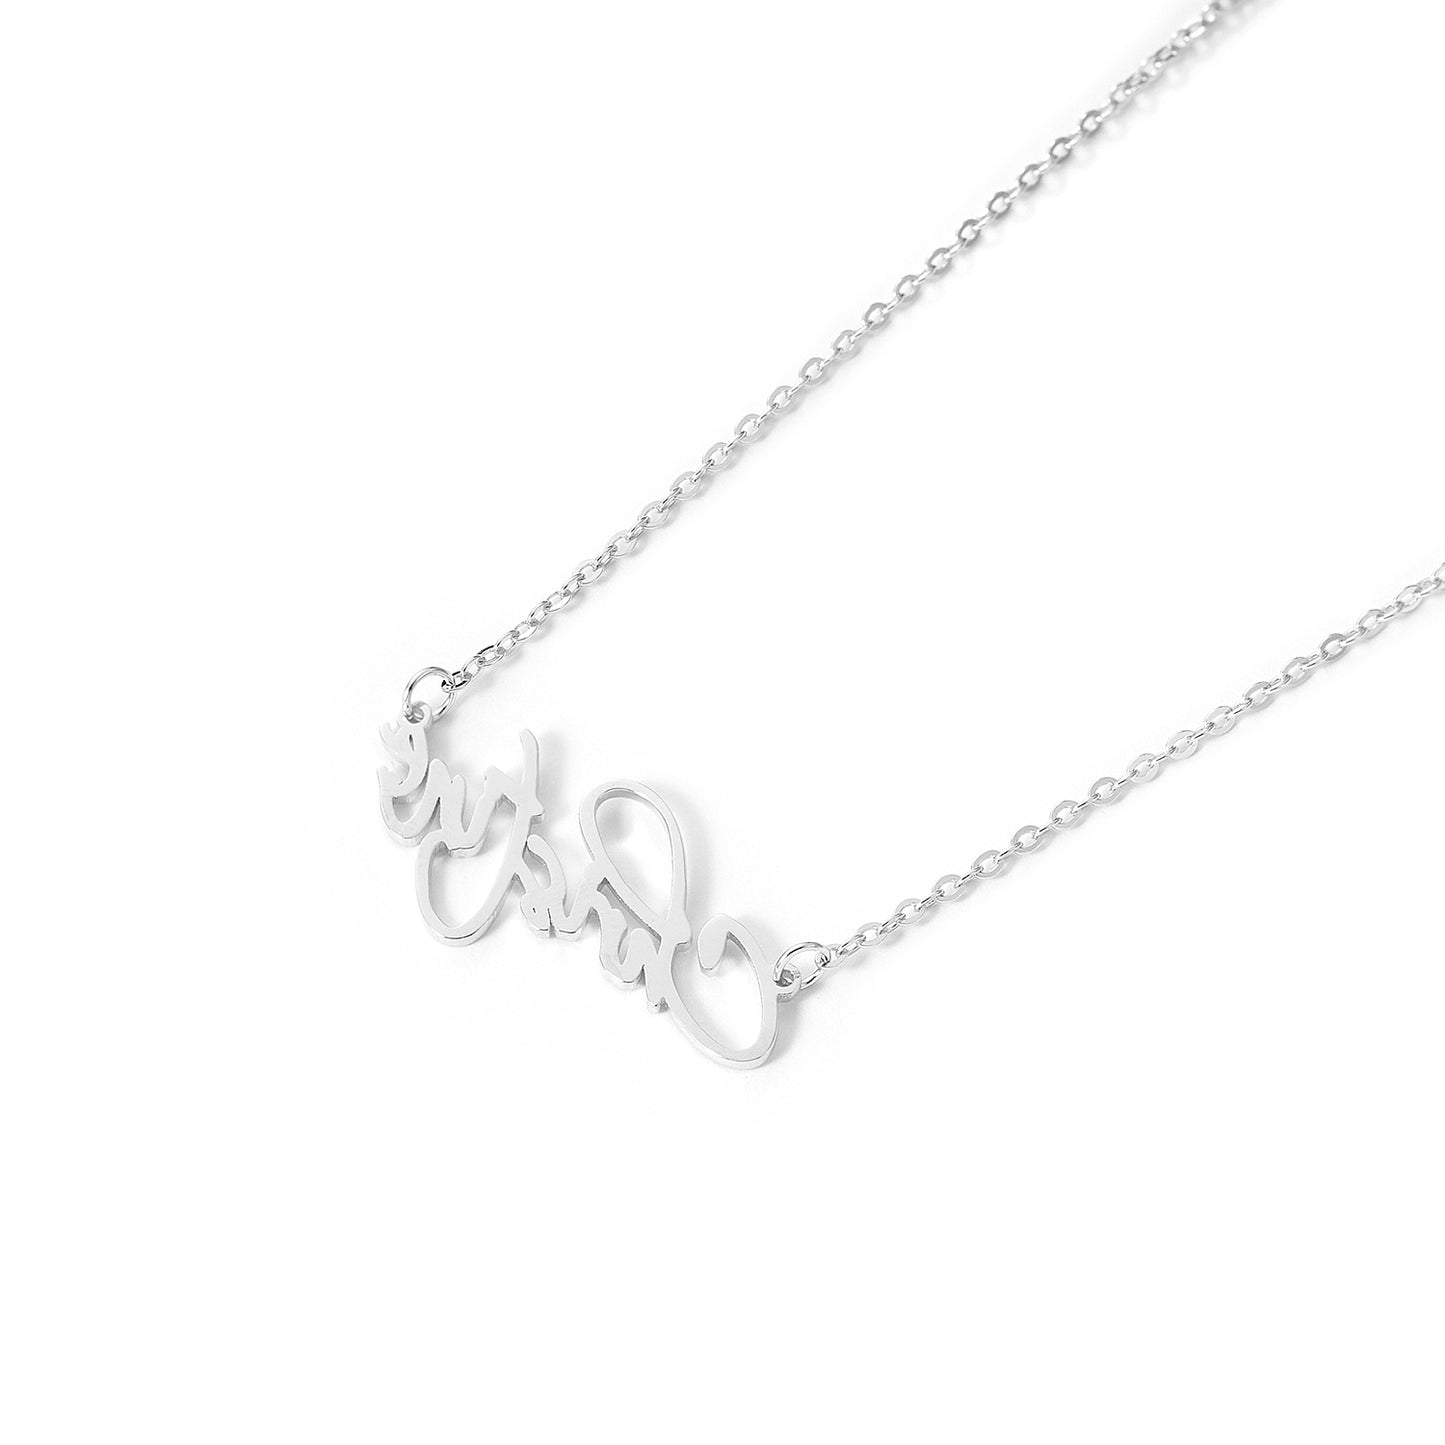 Customized 925 silver Logo letter Pendant charms with 18 inches necklace